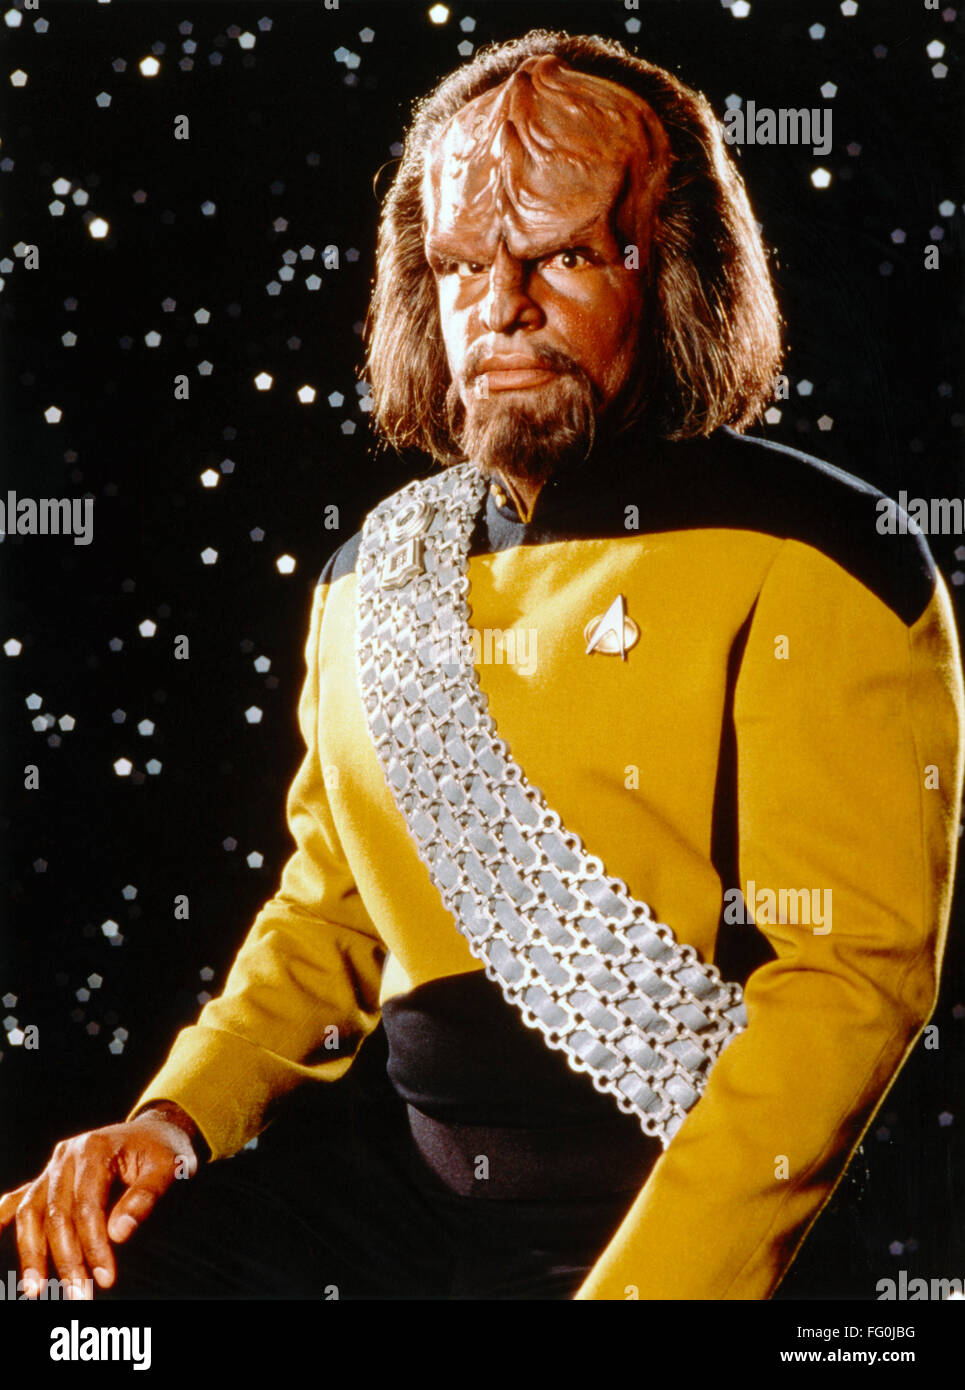 STAR TREK: WORF, c1987. /nThe character of Worf, played by Michael Dorn, in Star Trek: The Next Generation. Photograph, c1987. Stock Photo